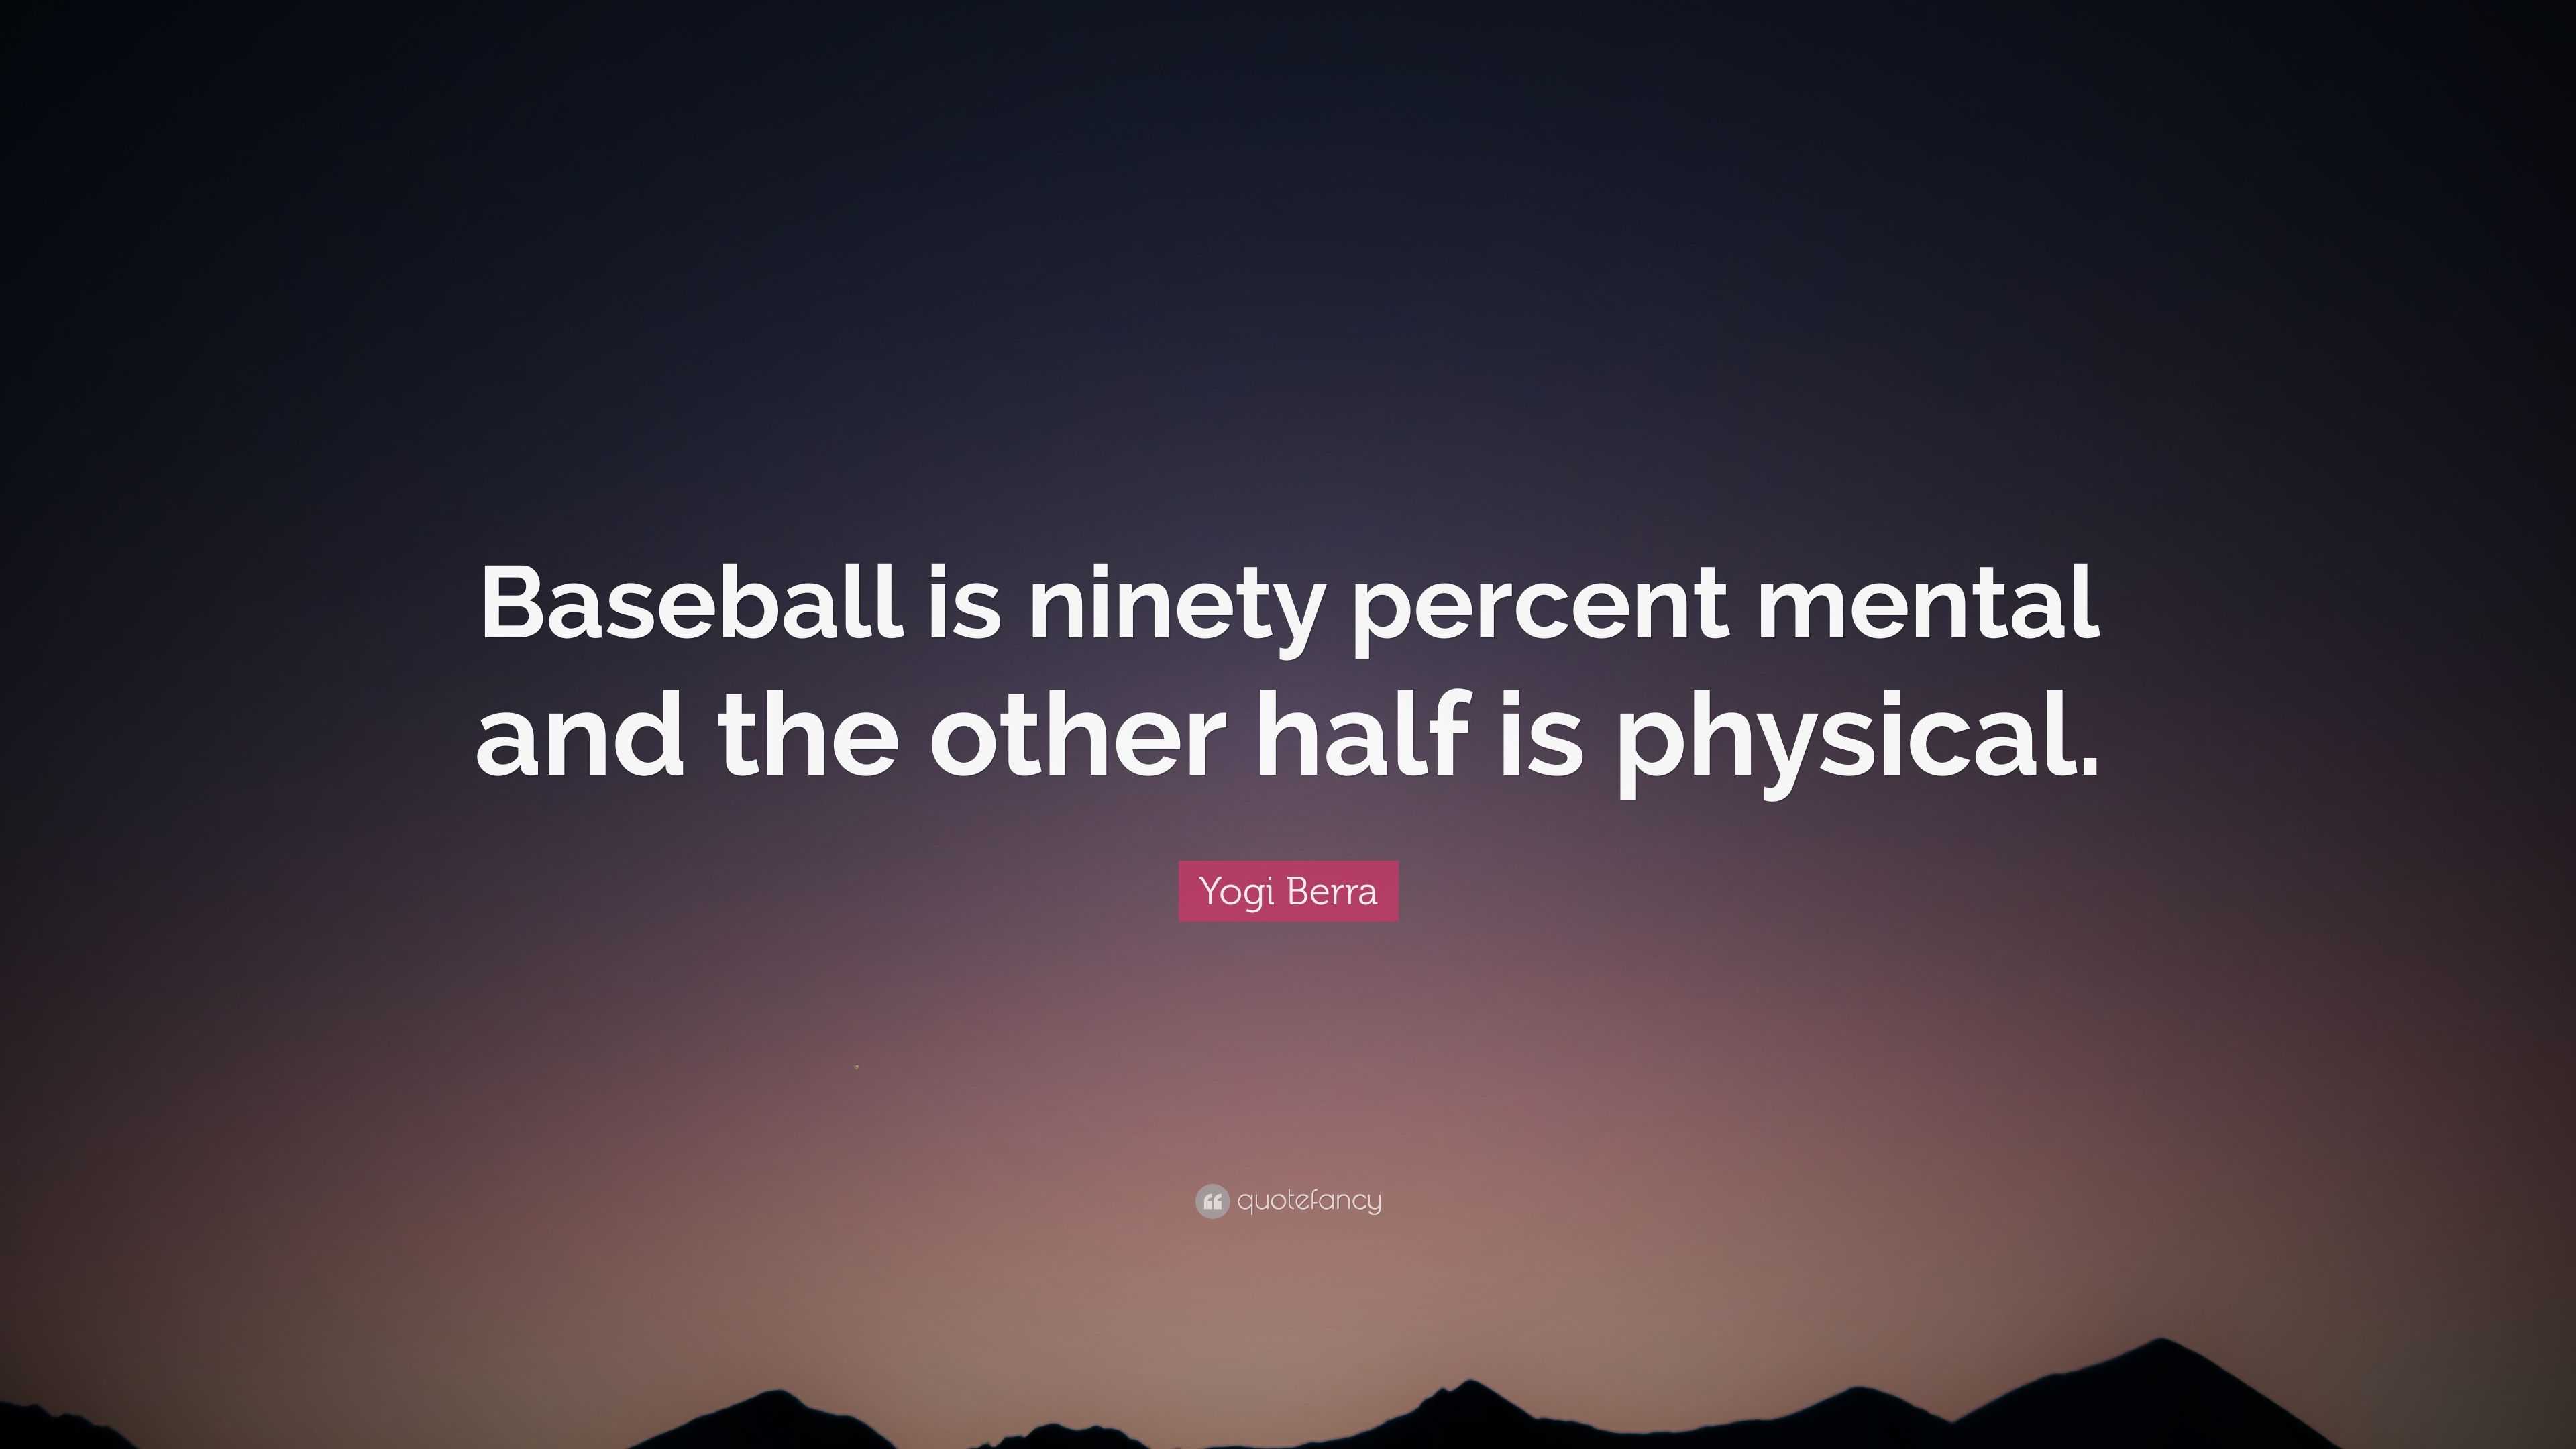 Yogi Berra Quote: “Baseball is ninety percent mental and the other half ...